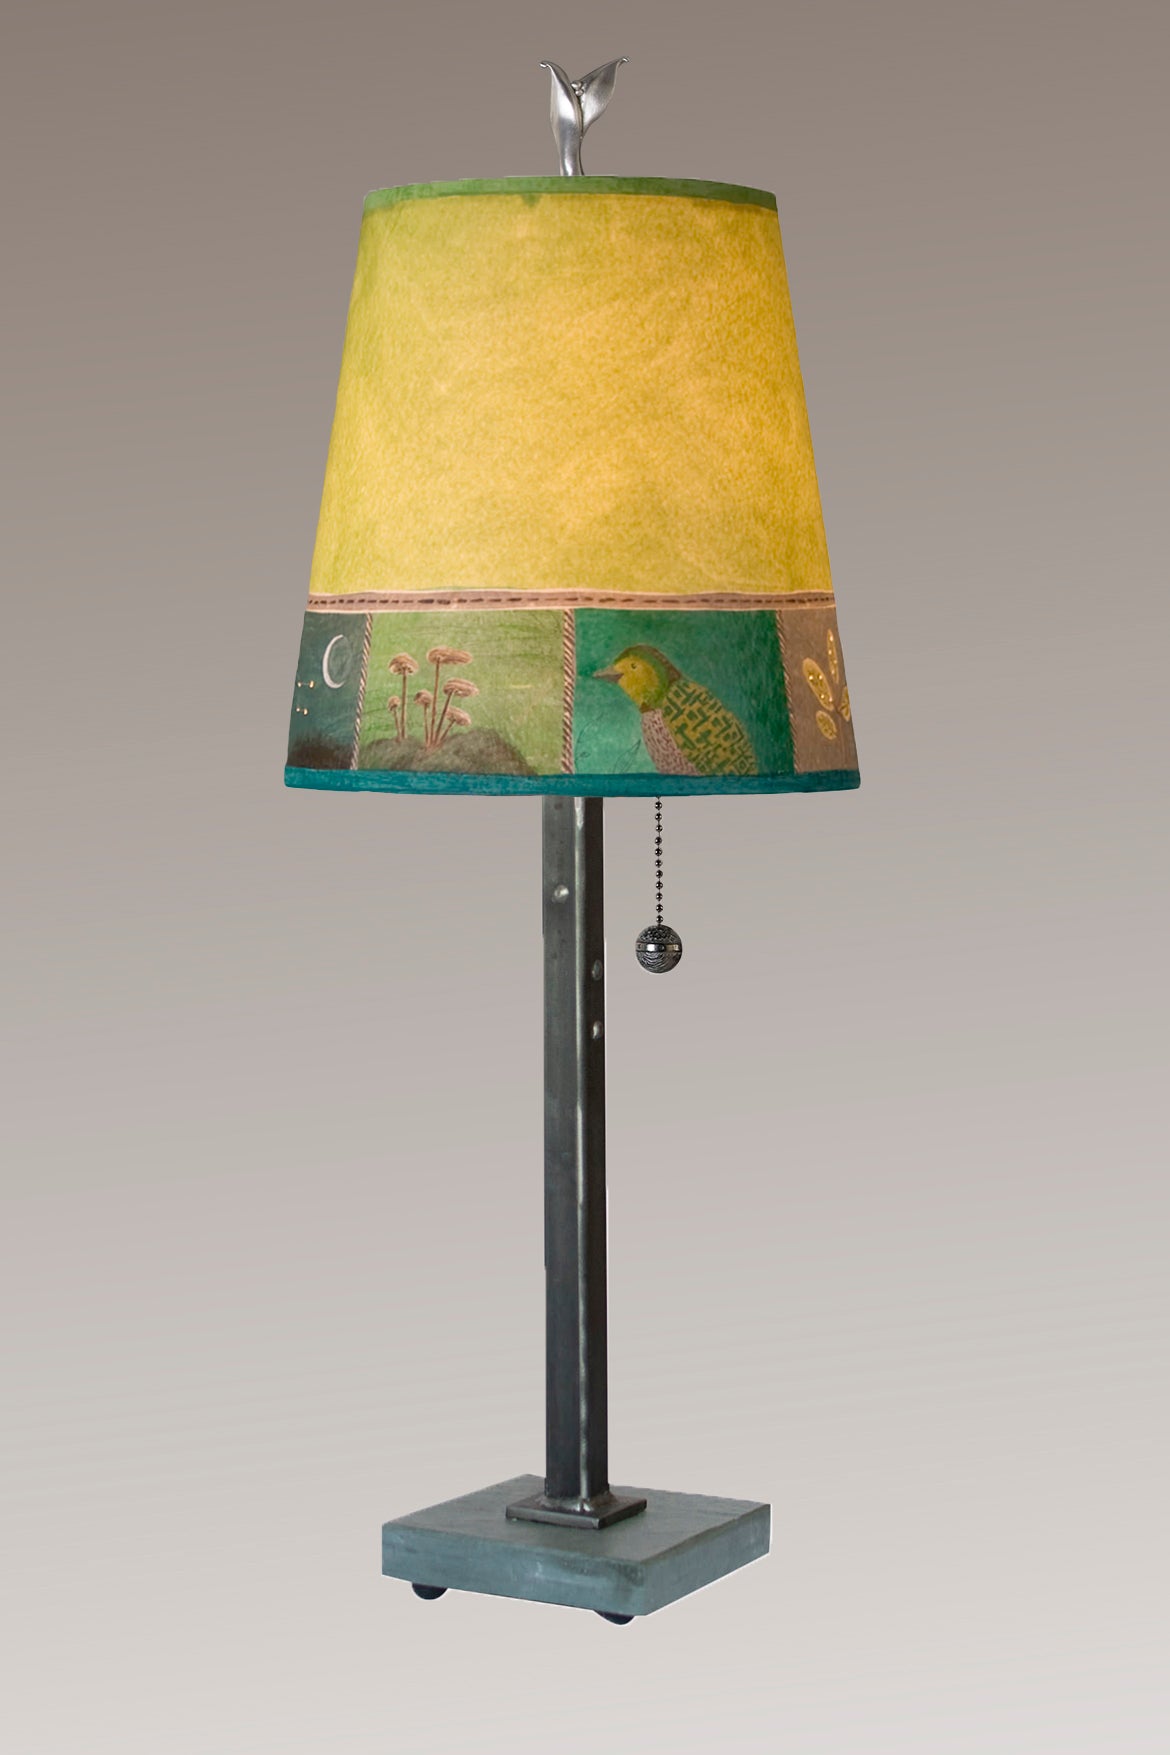 Janna Ugone &amp; Co Table Lamps Steel Table Lamp with Small Drum Shade in Woodland Trails in Leaf